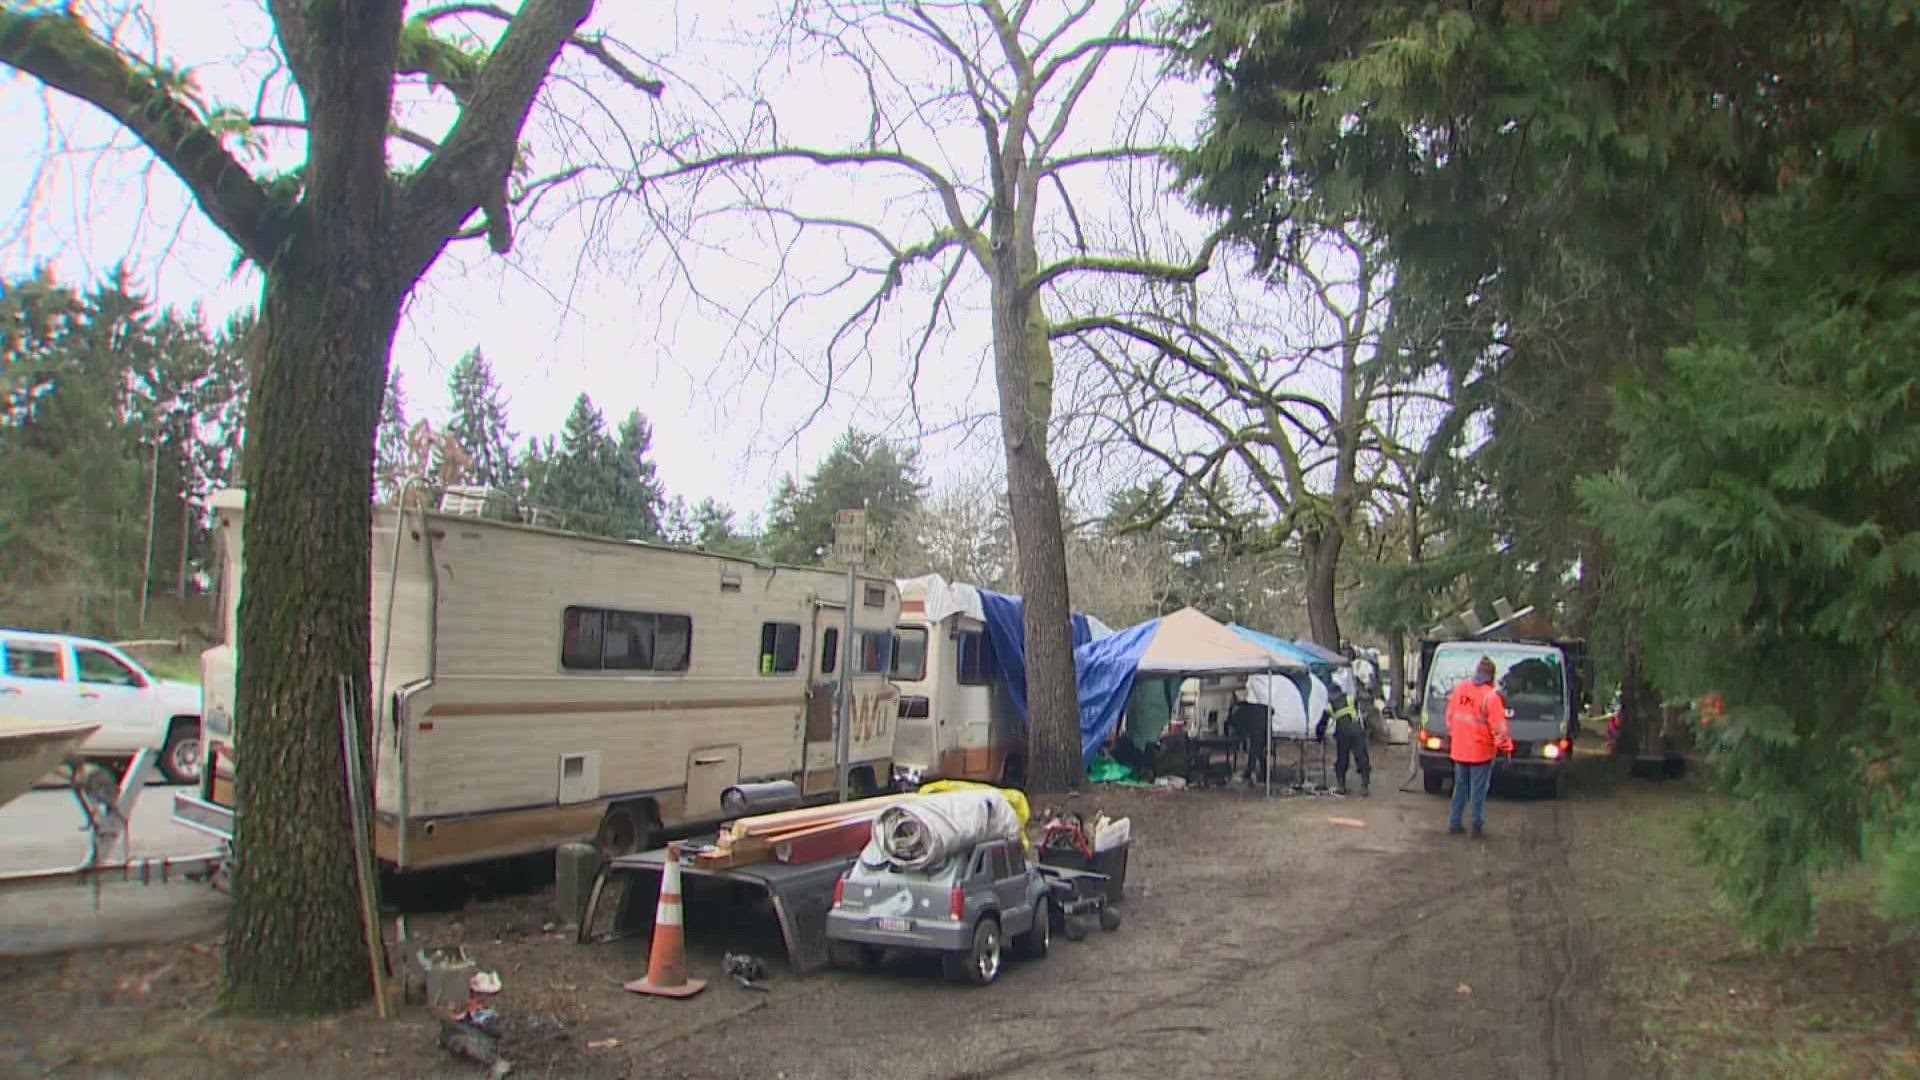 In October, city officials called this encampment a top priority.